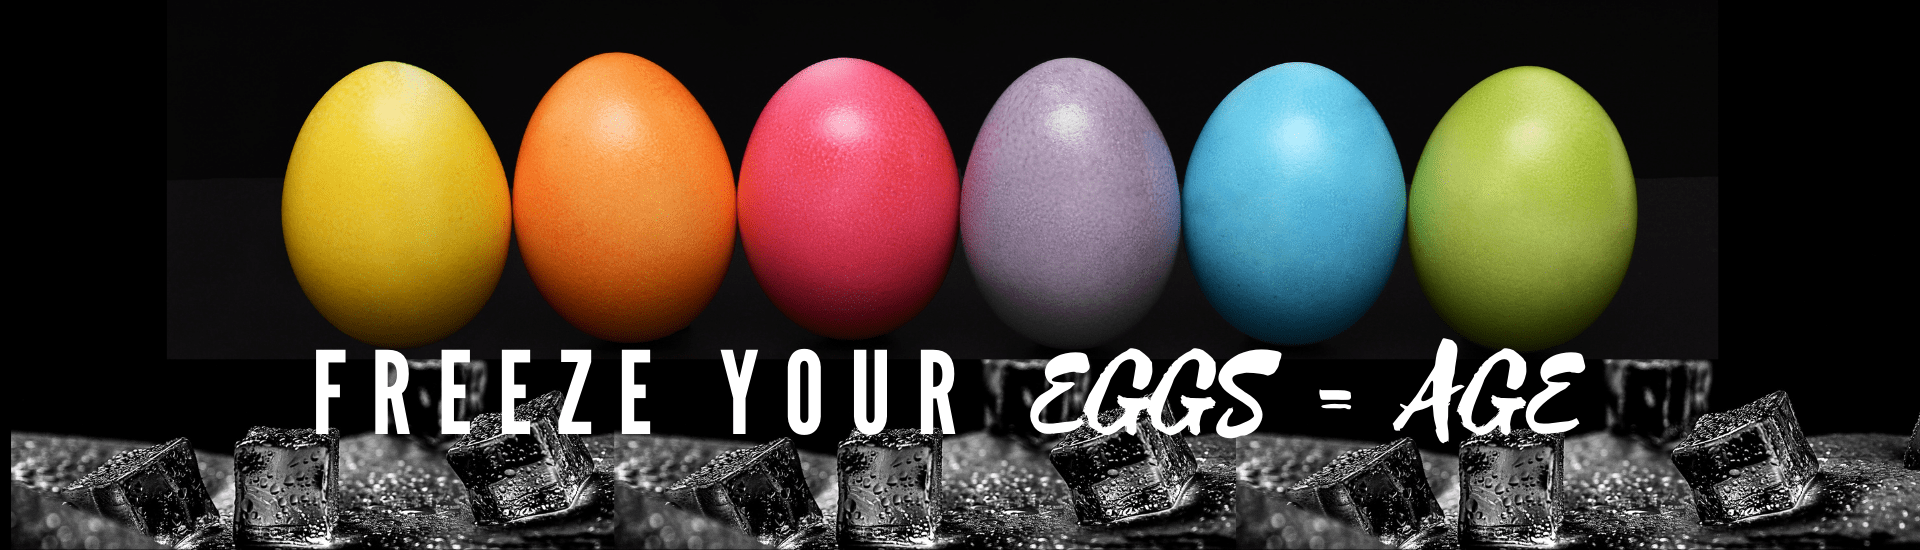 free eggs and age